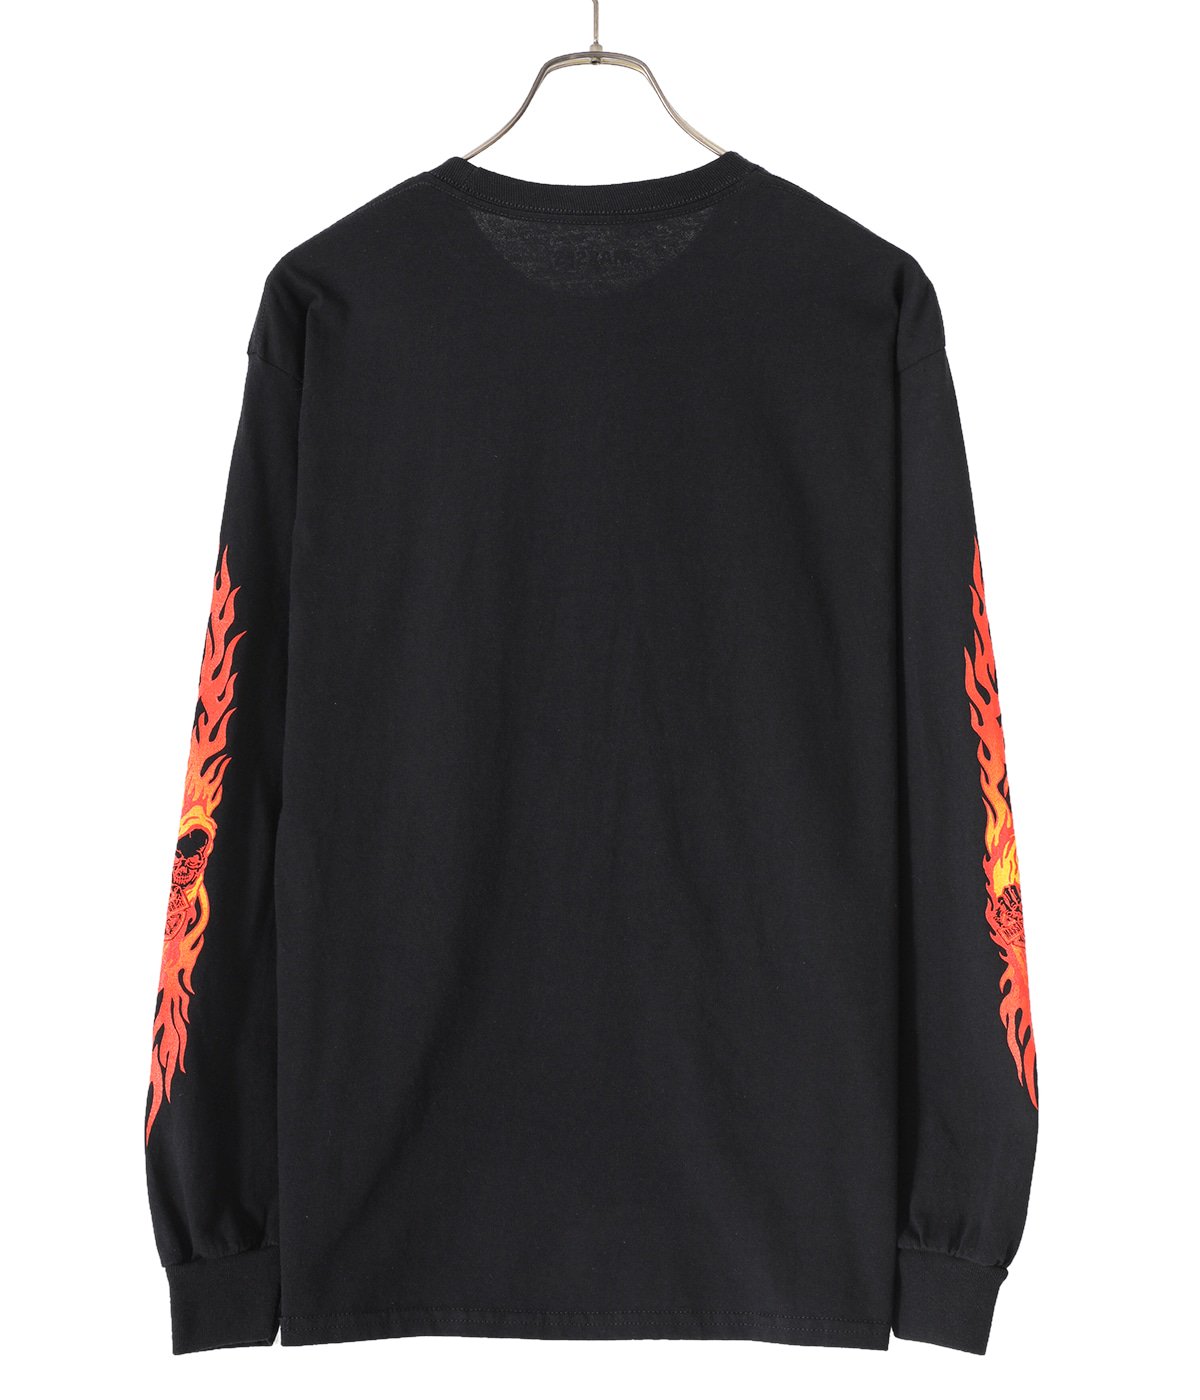 T-SHIRT L/S FLAME3 | MASSES(マシス) / トップス カットソー長袖 